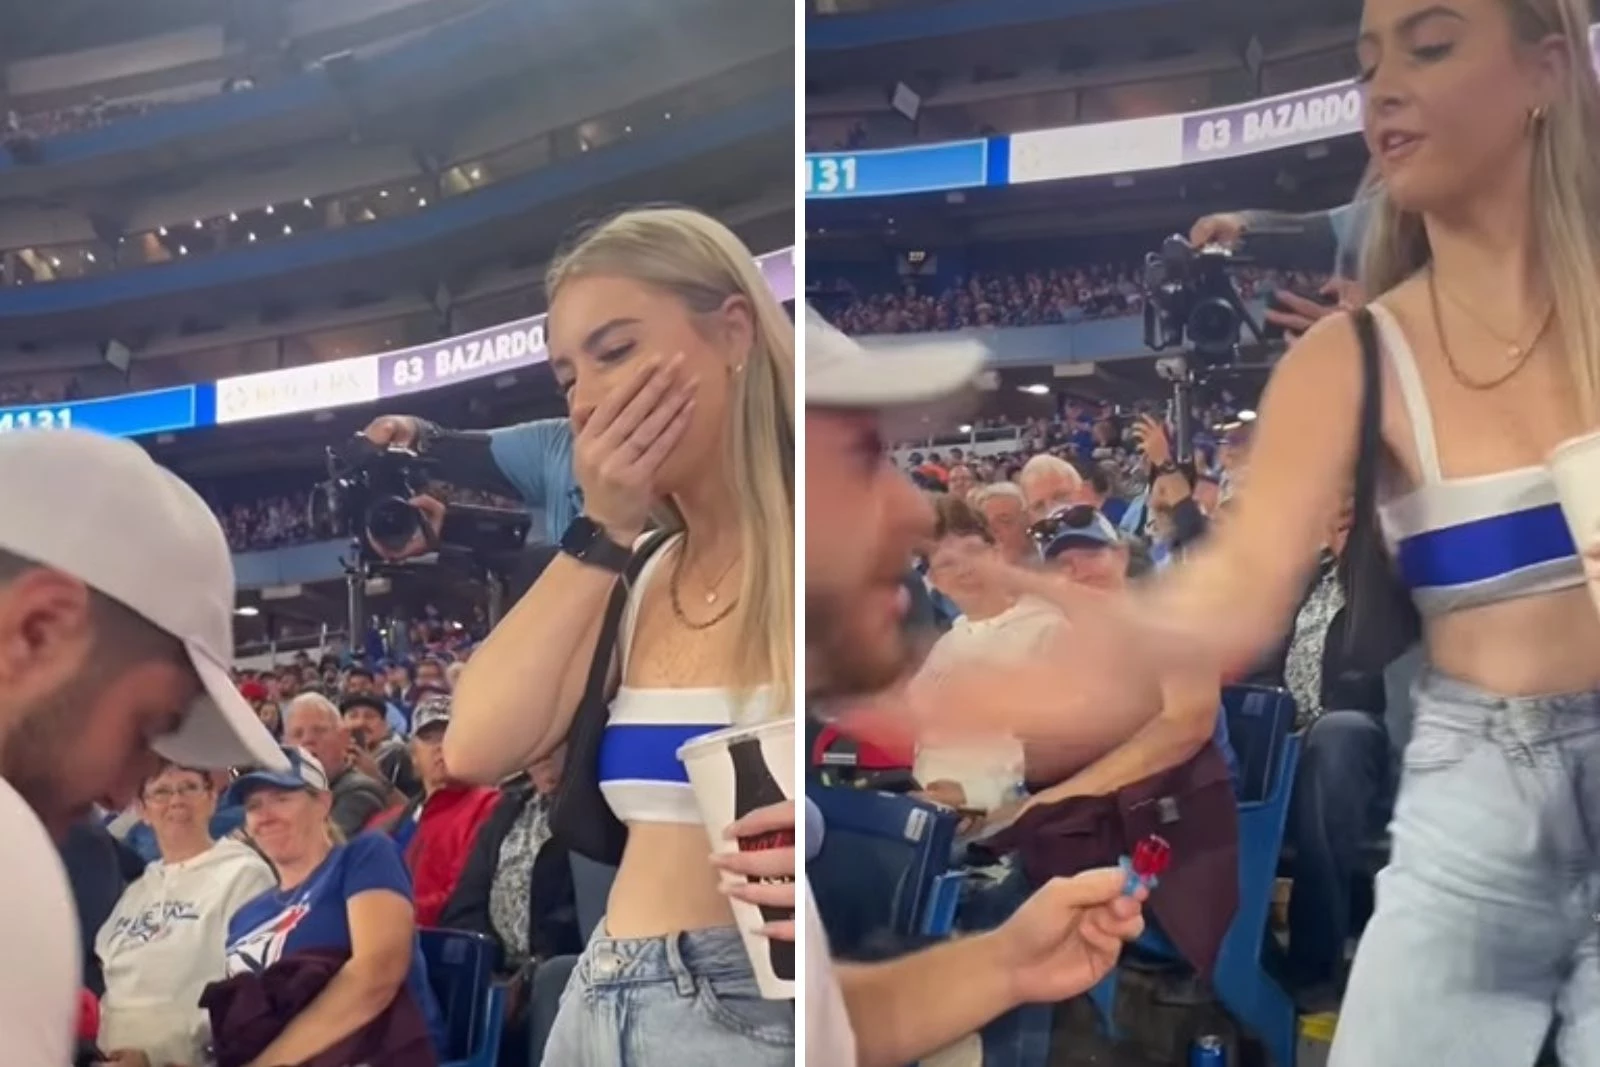 Fan drops ring before popping the question 